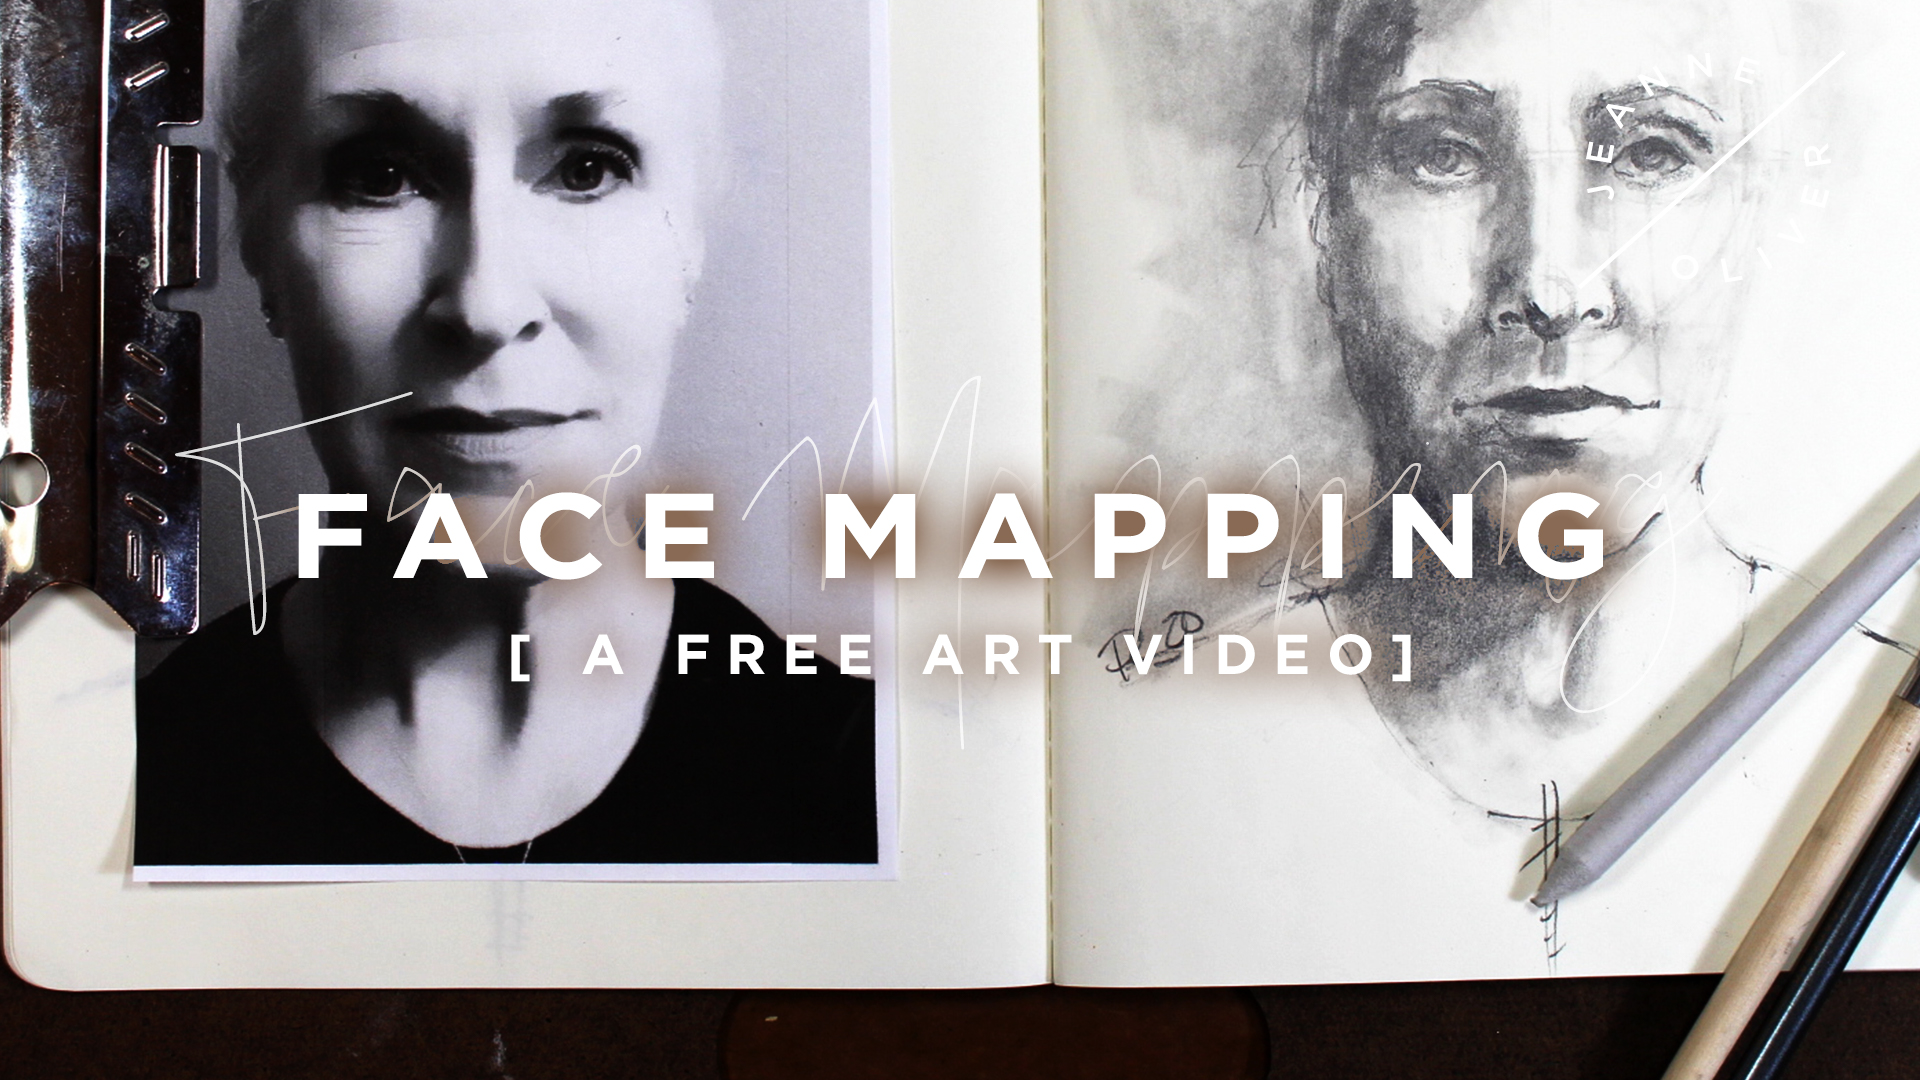 A Brand New Free Art Video with Pam Carriker | Face Mapping